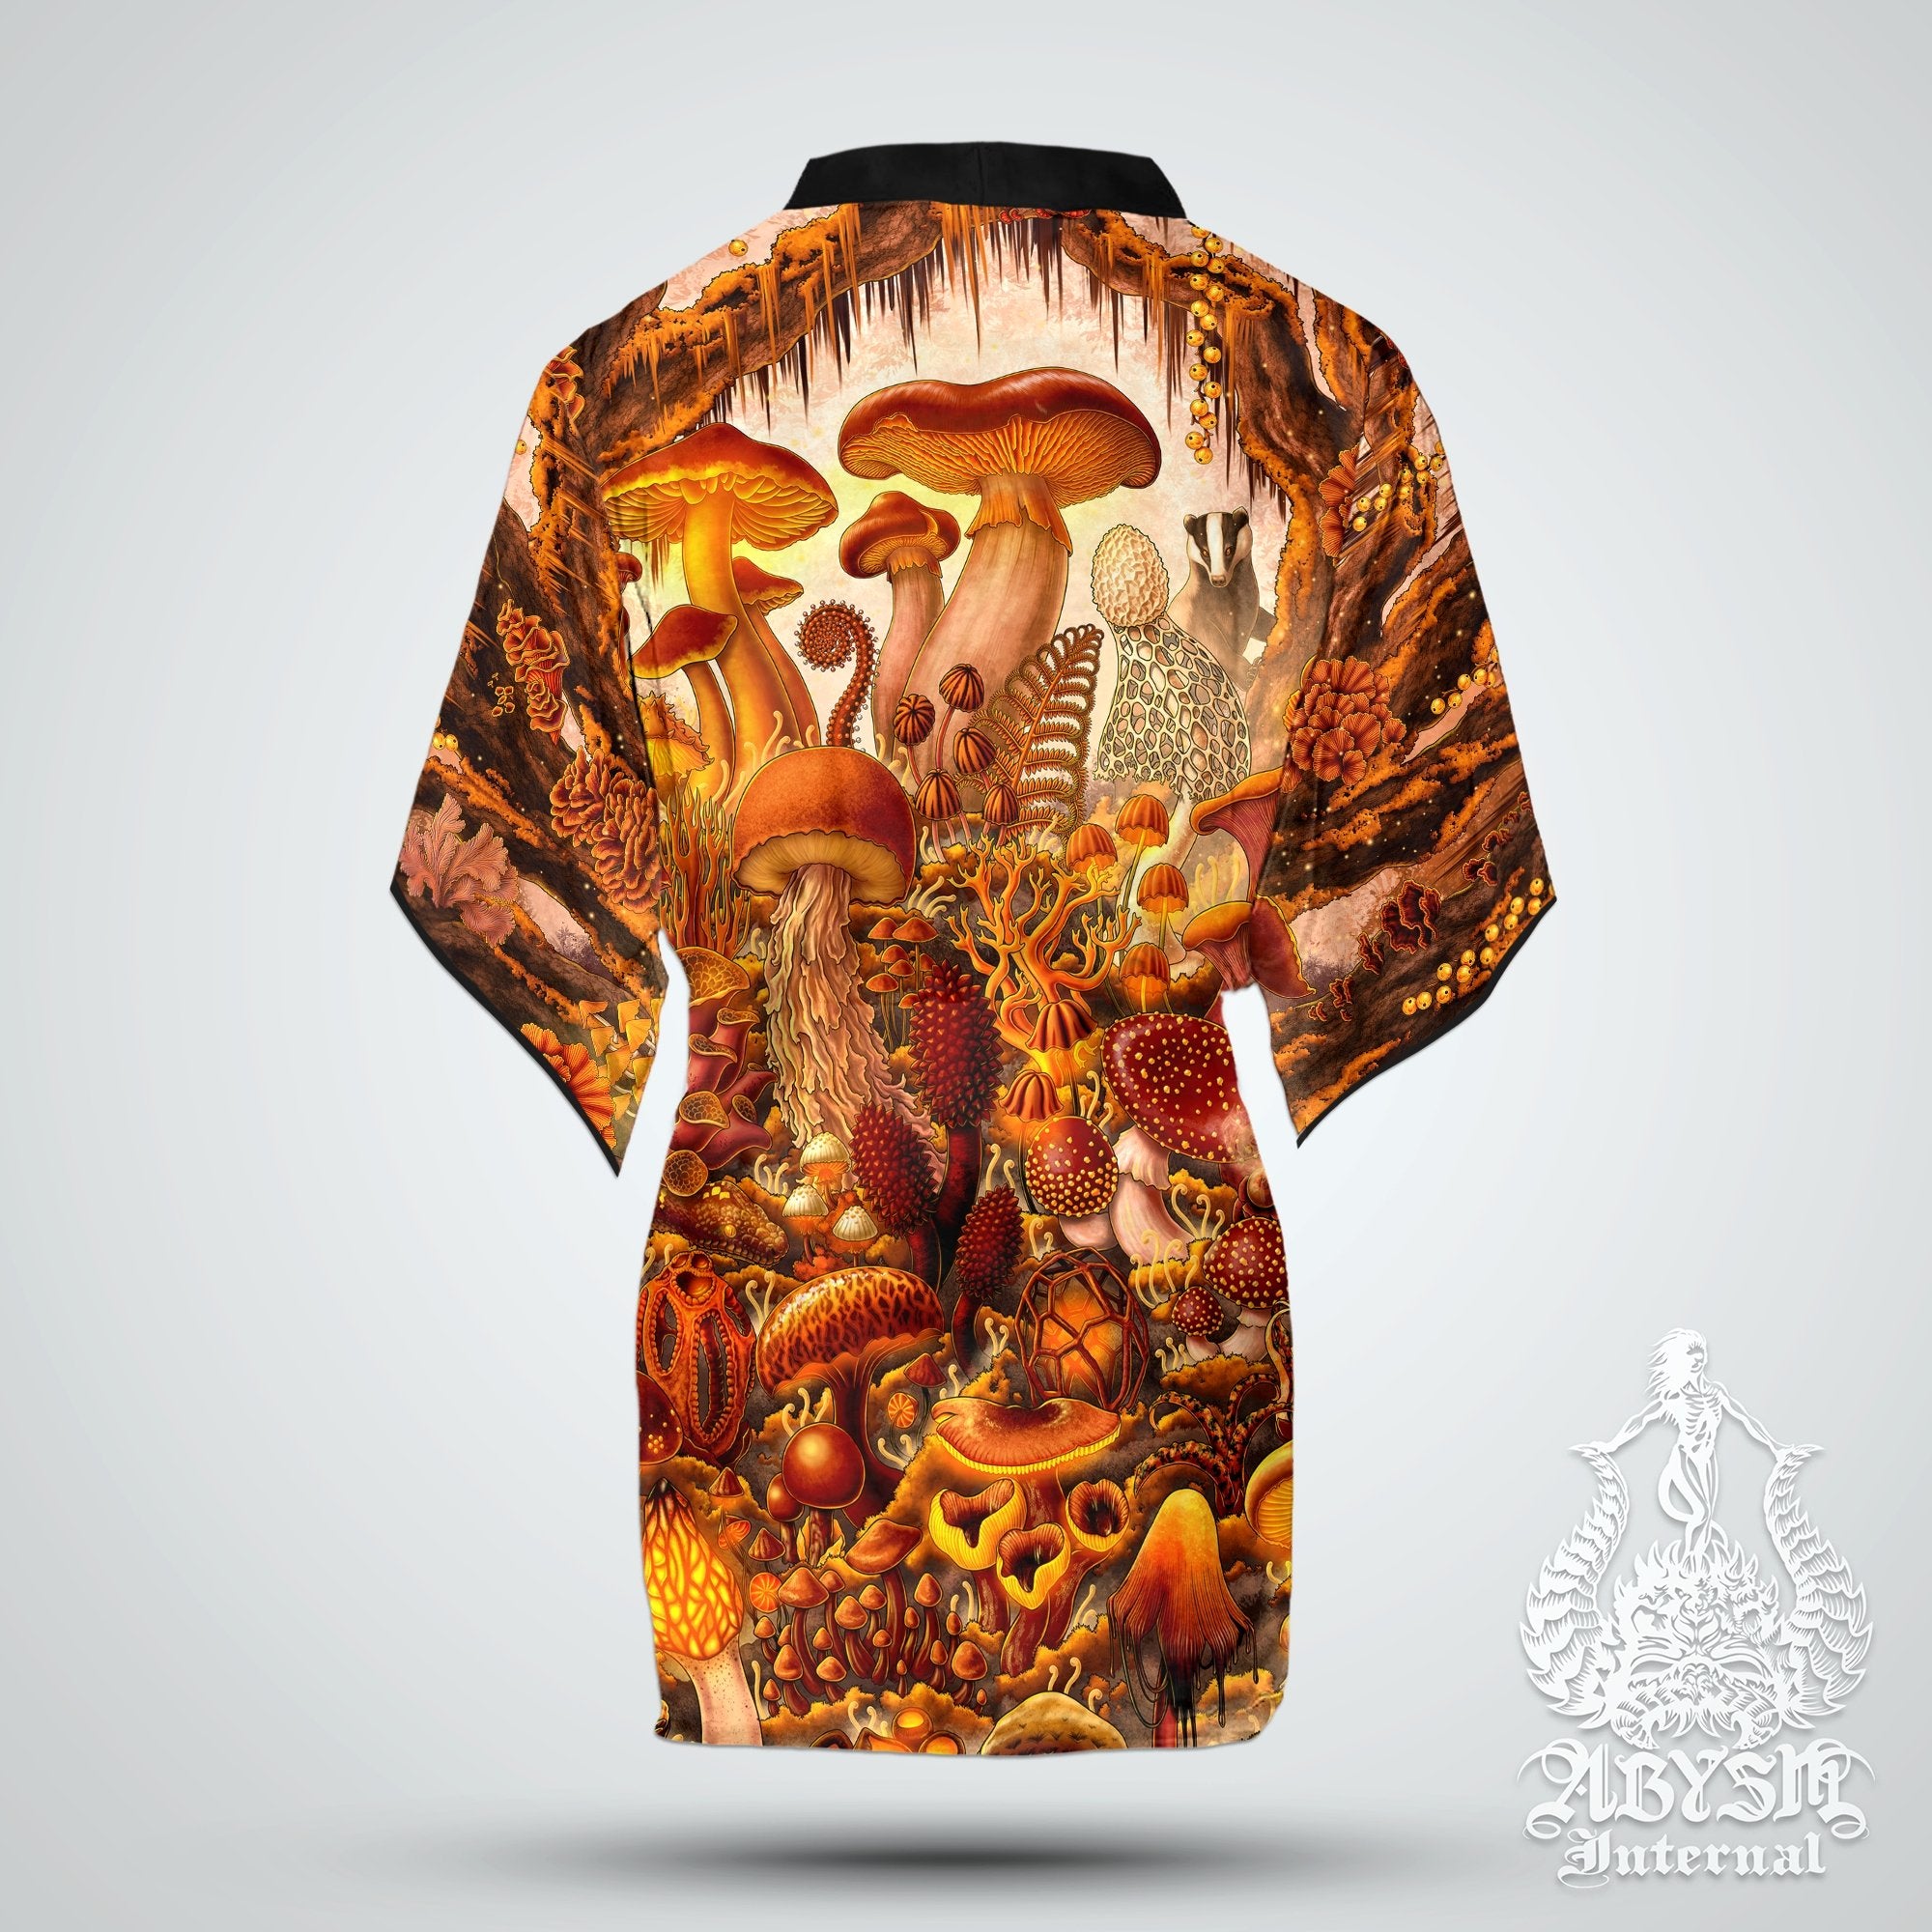 Mushrooms Cover Up, Mycologyst Outfit, Biology Teacher Gift, Indie Party Kimono, Summer Festival Robe, Mycology Art, Alternative Clothing, Unisex - Steampunk - Abysm Internal